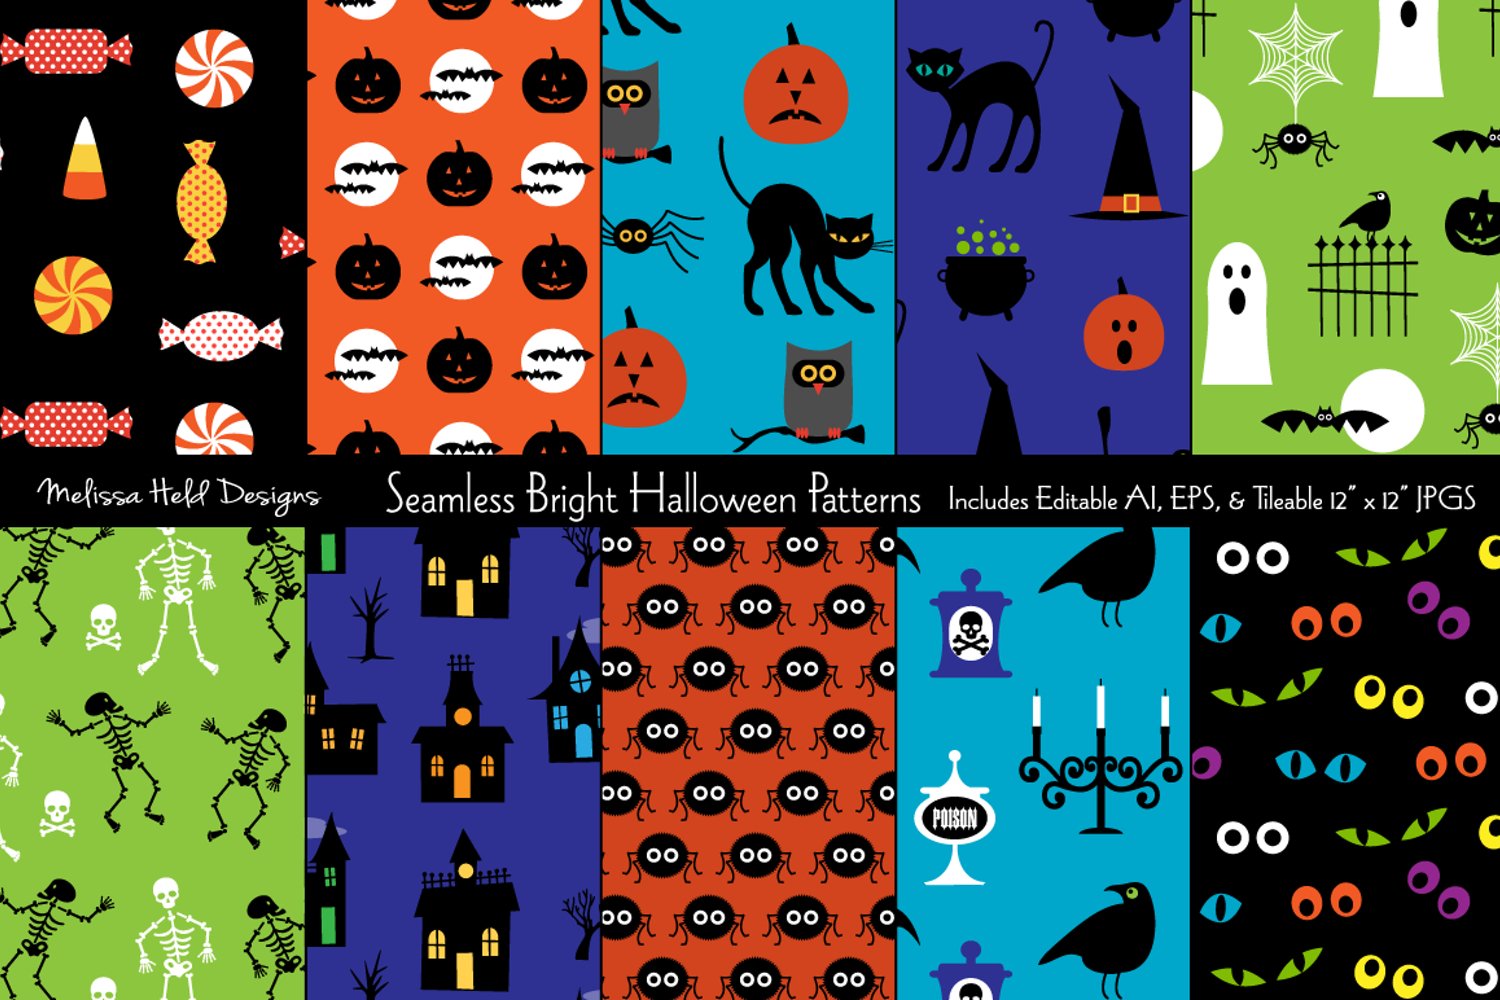 Cover image of Seamless Bright Halloween Patterns.